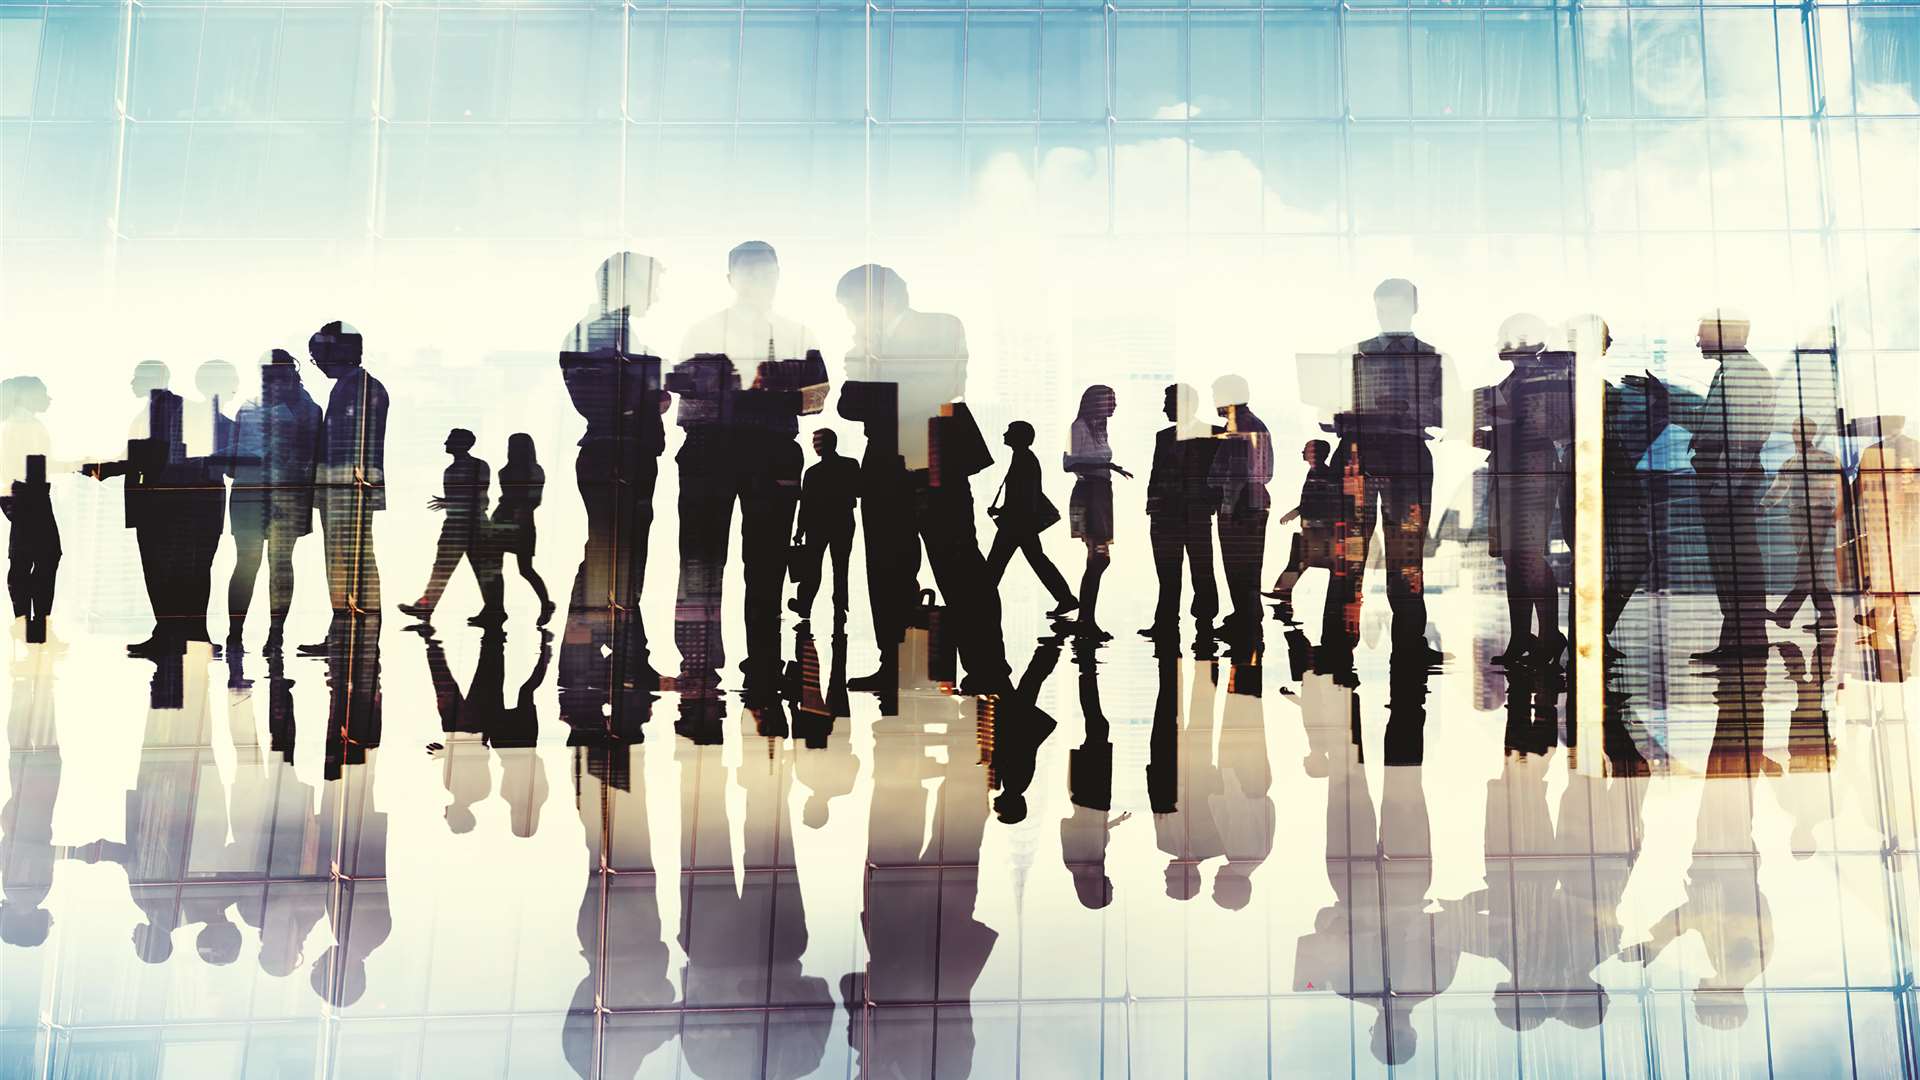 Silhouettes of business people working in an office